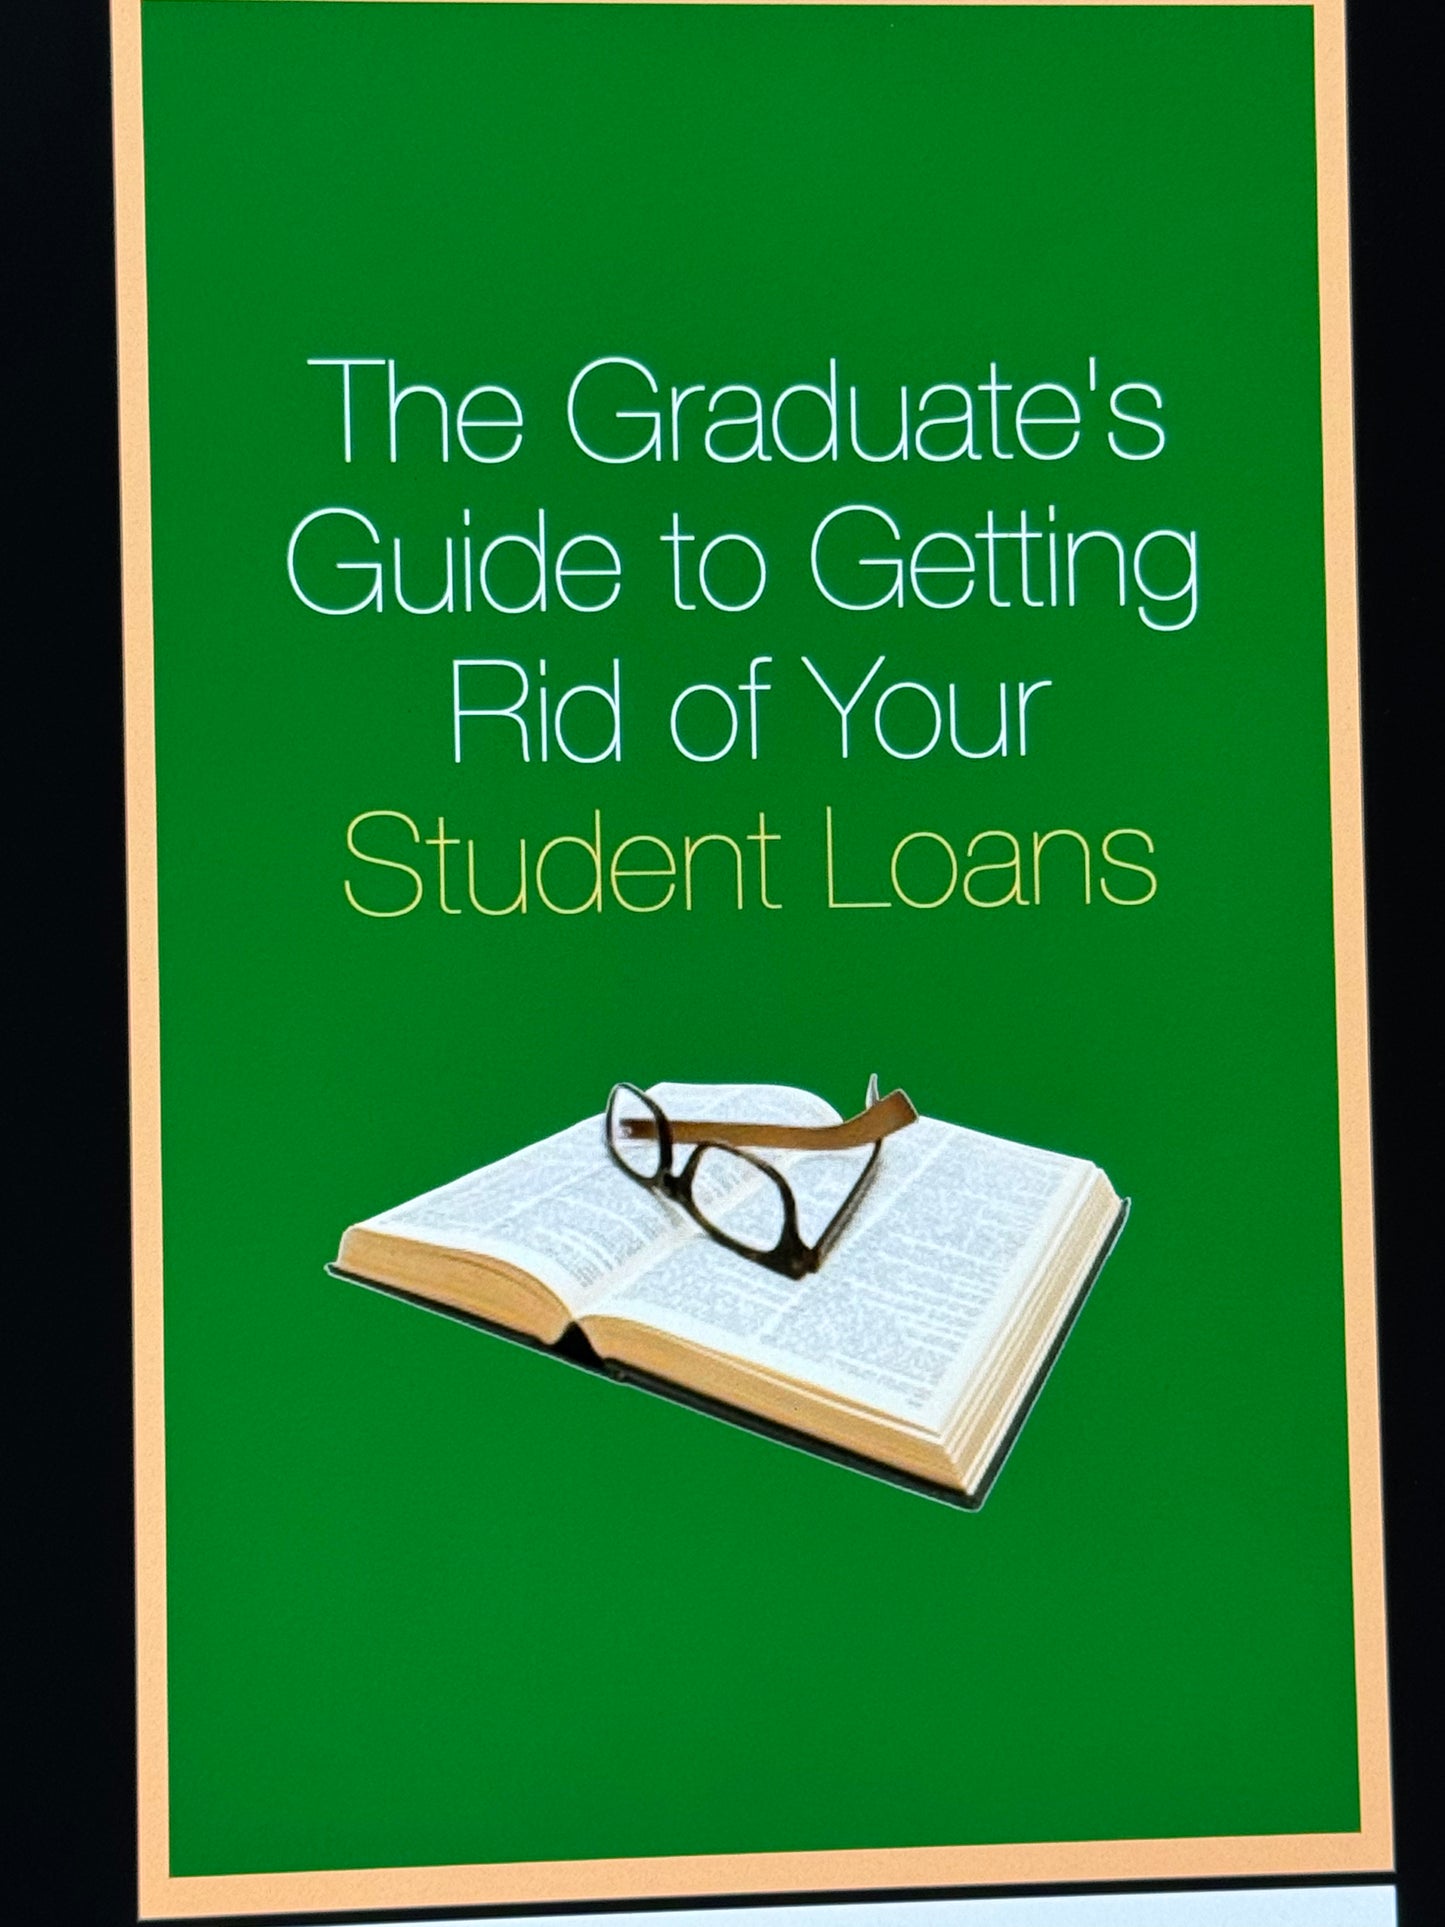 The Graduate's Guide To getting Rid of Your Student Loans